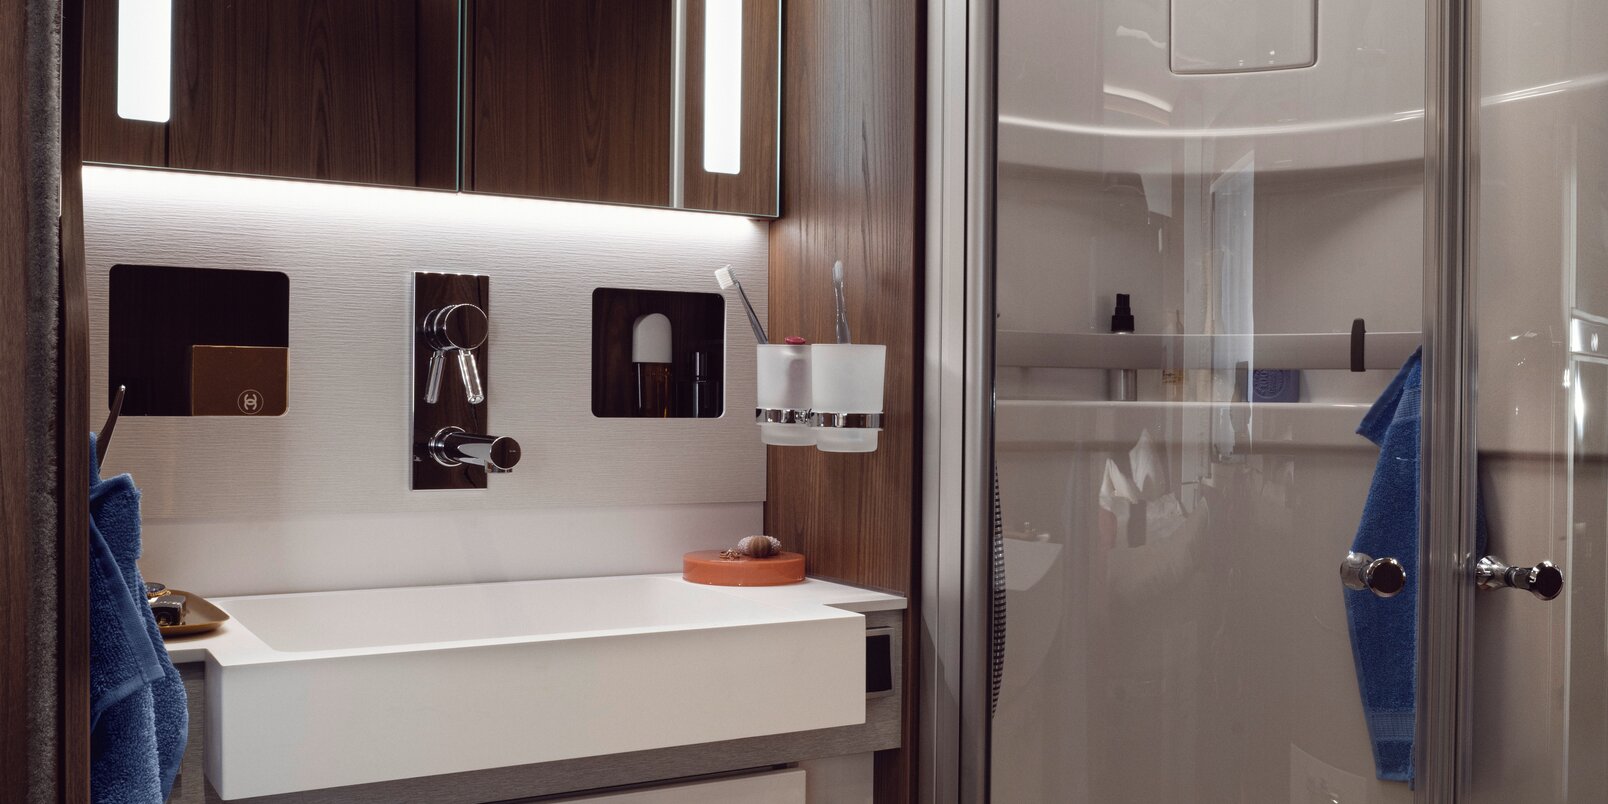 Bathroom in the HYMER B-ML I 890: illuminated mirror cabinet, drawers under the washbasin, separate shower with real glass doors